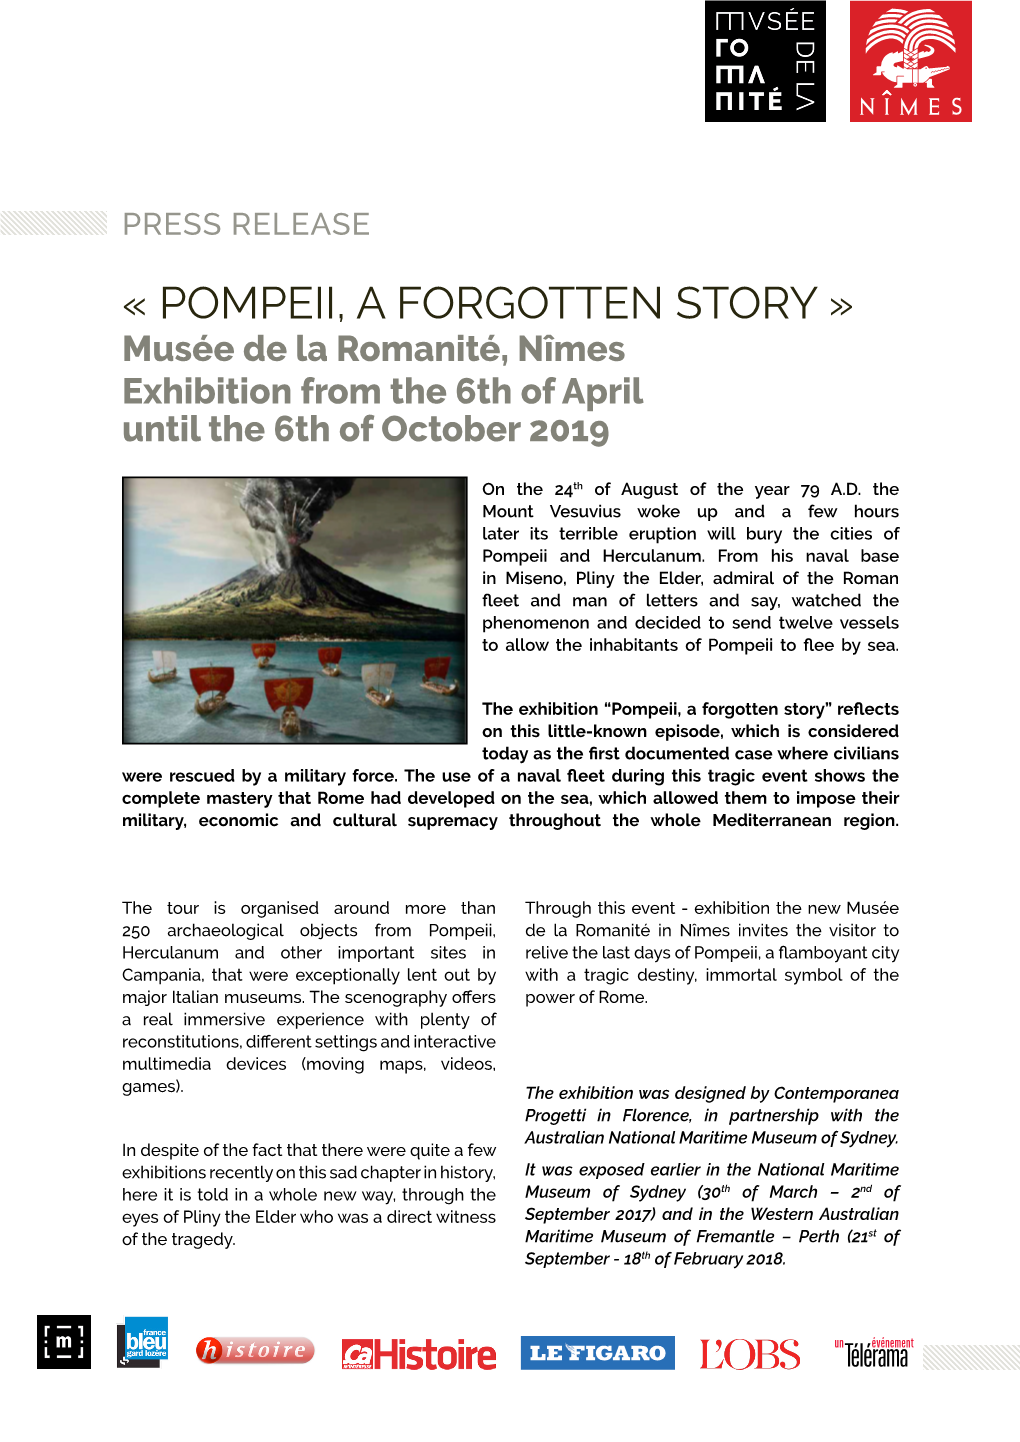 « POMPEII, a FORGOTTEN STORY » Musée De La Romanité, Nîmes Exhibition from the 6Th of April Until the 6Th of October 2019